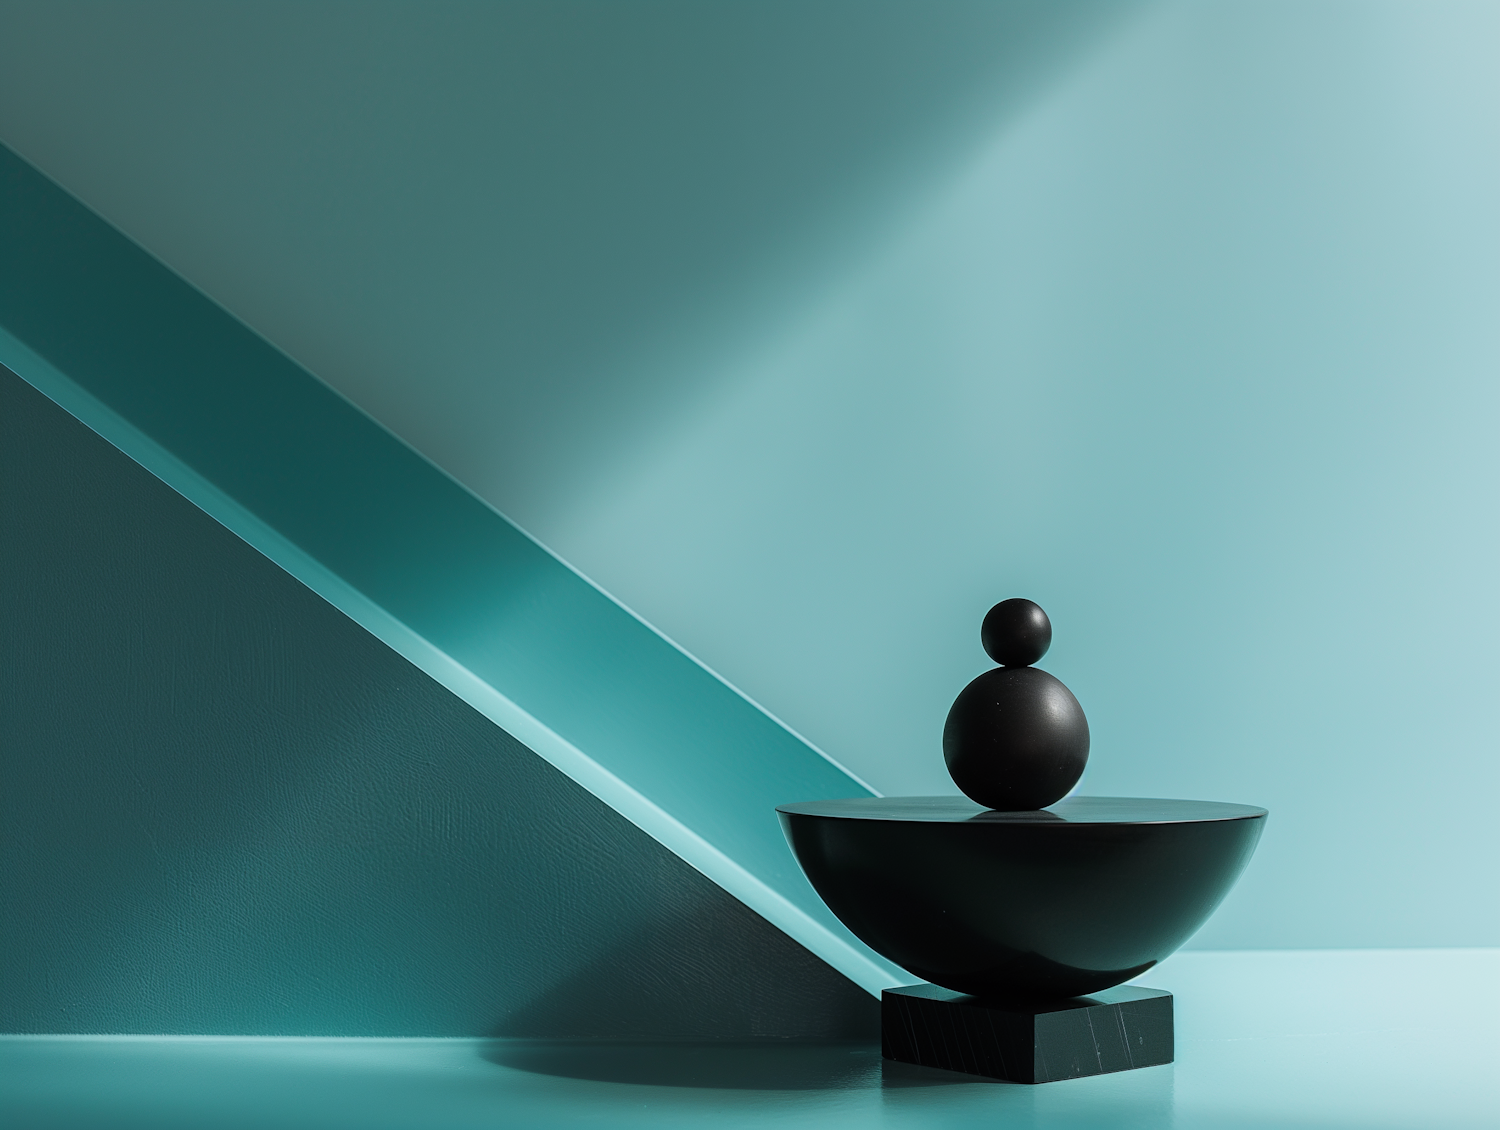 Abstract Geometric Composition in Teal and Aqua